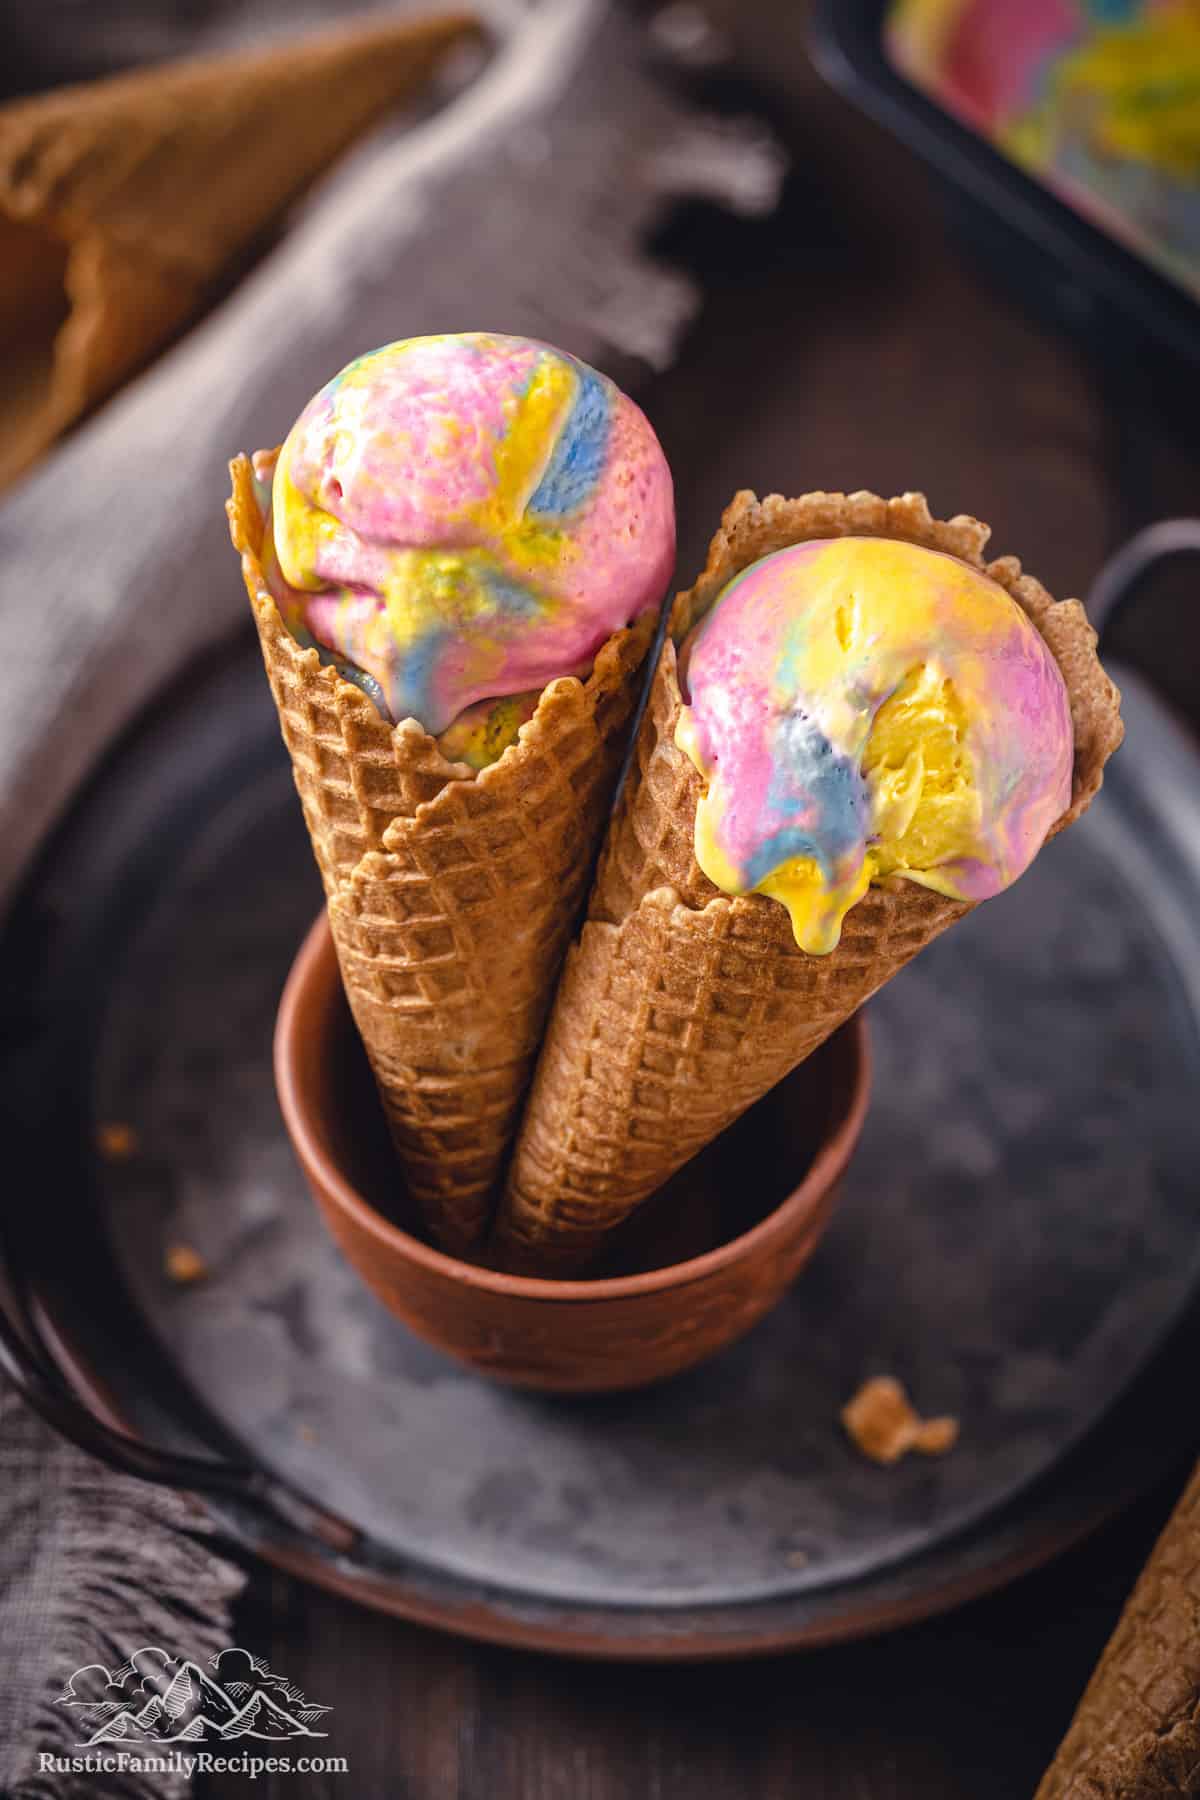 Two side-by-side ice cream cones with a scoop of Superman ice cream in each.